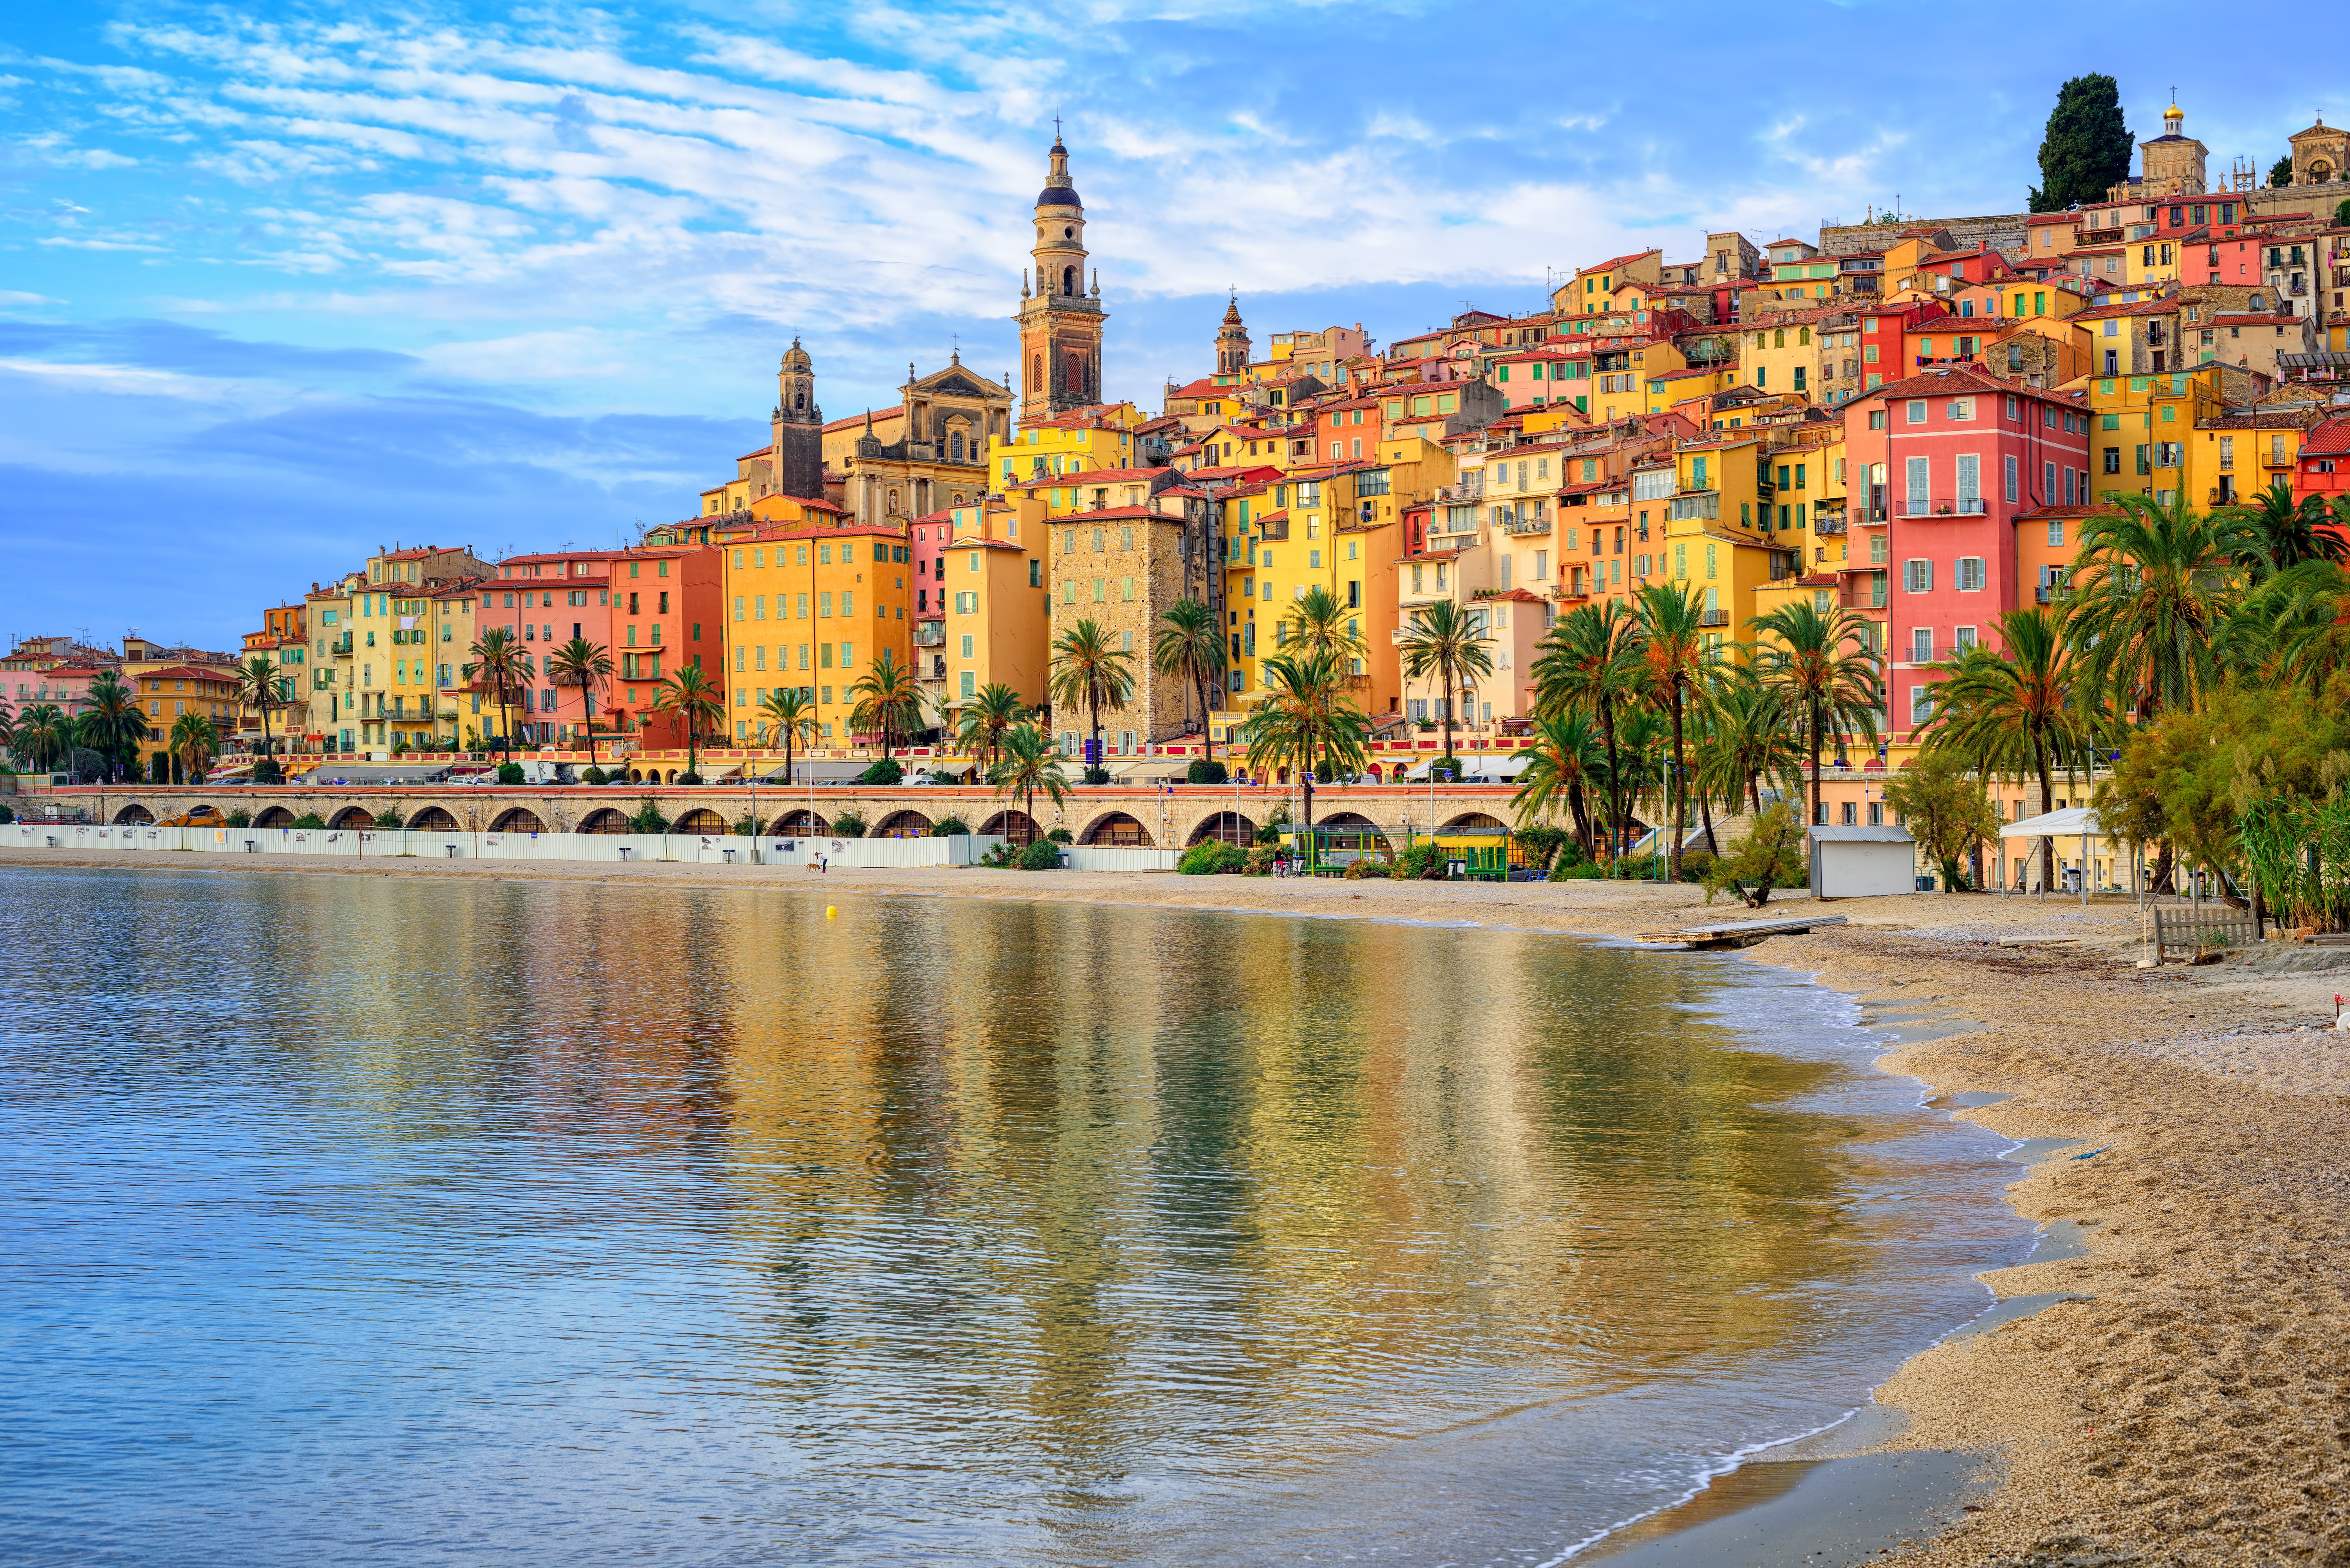 Menton in Nice on the French Riviera, France.